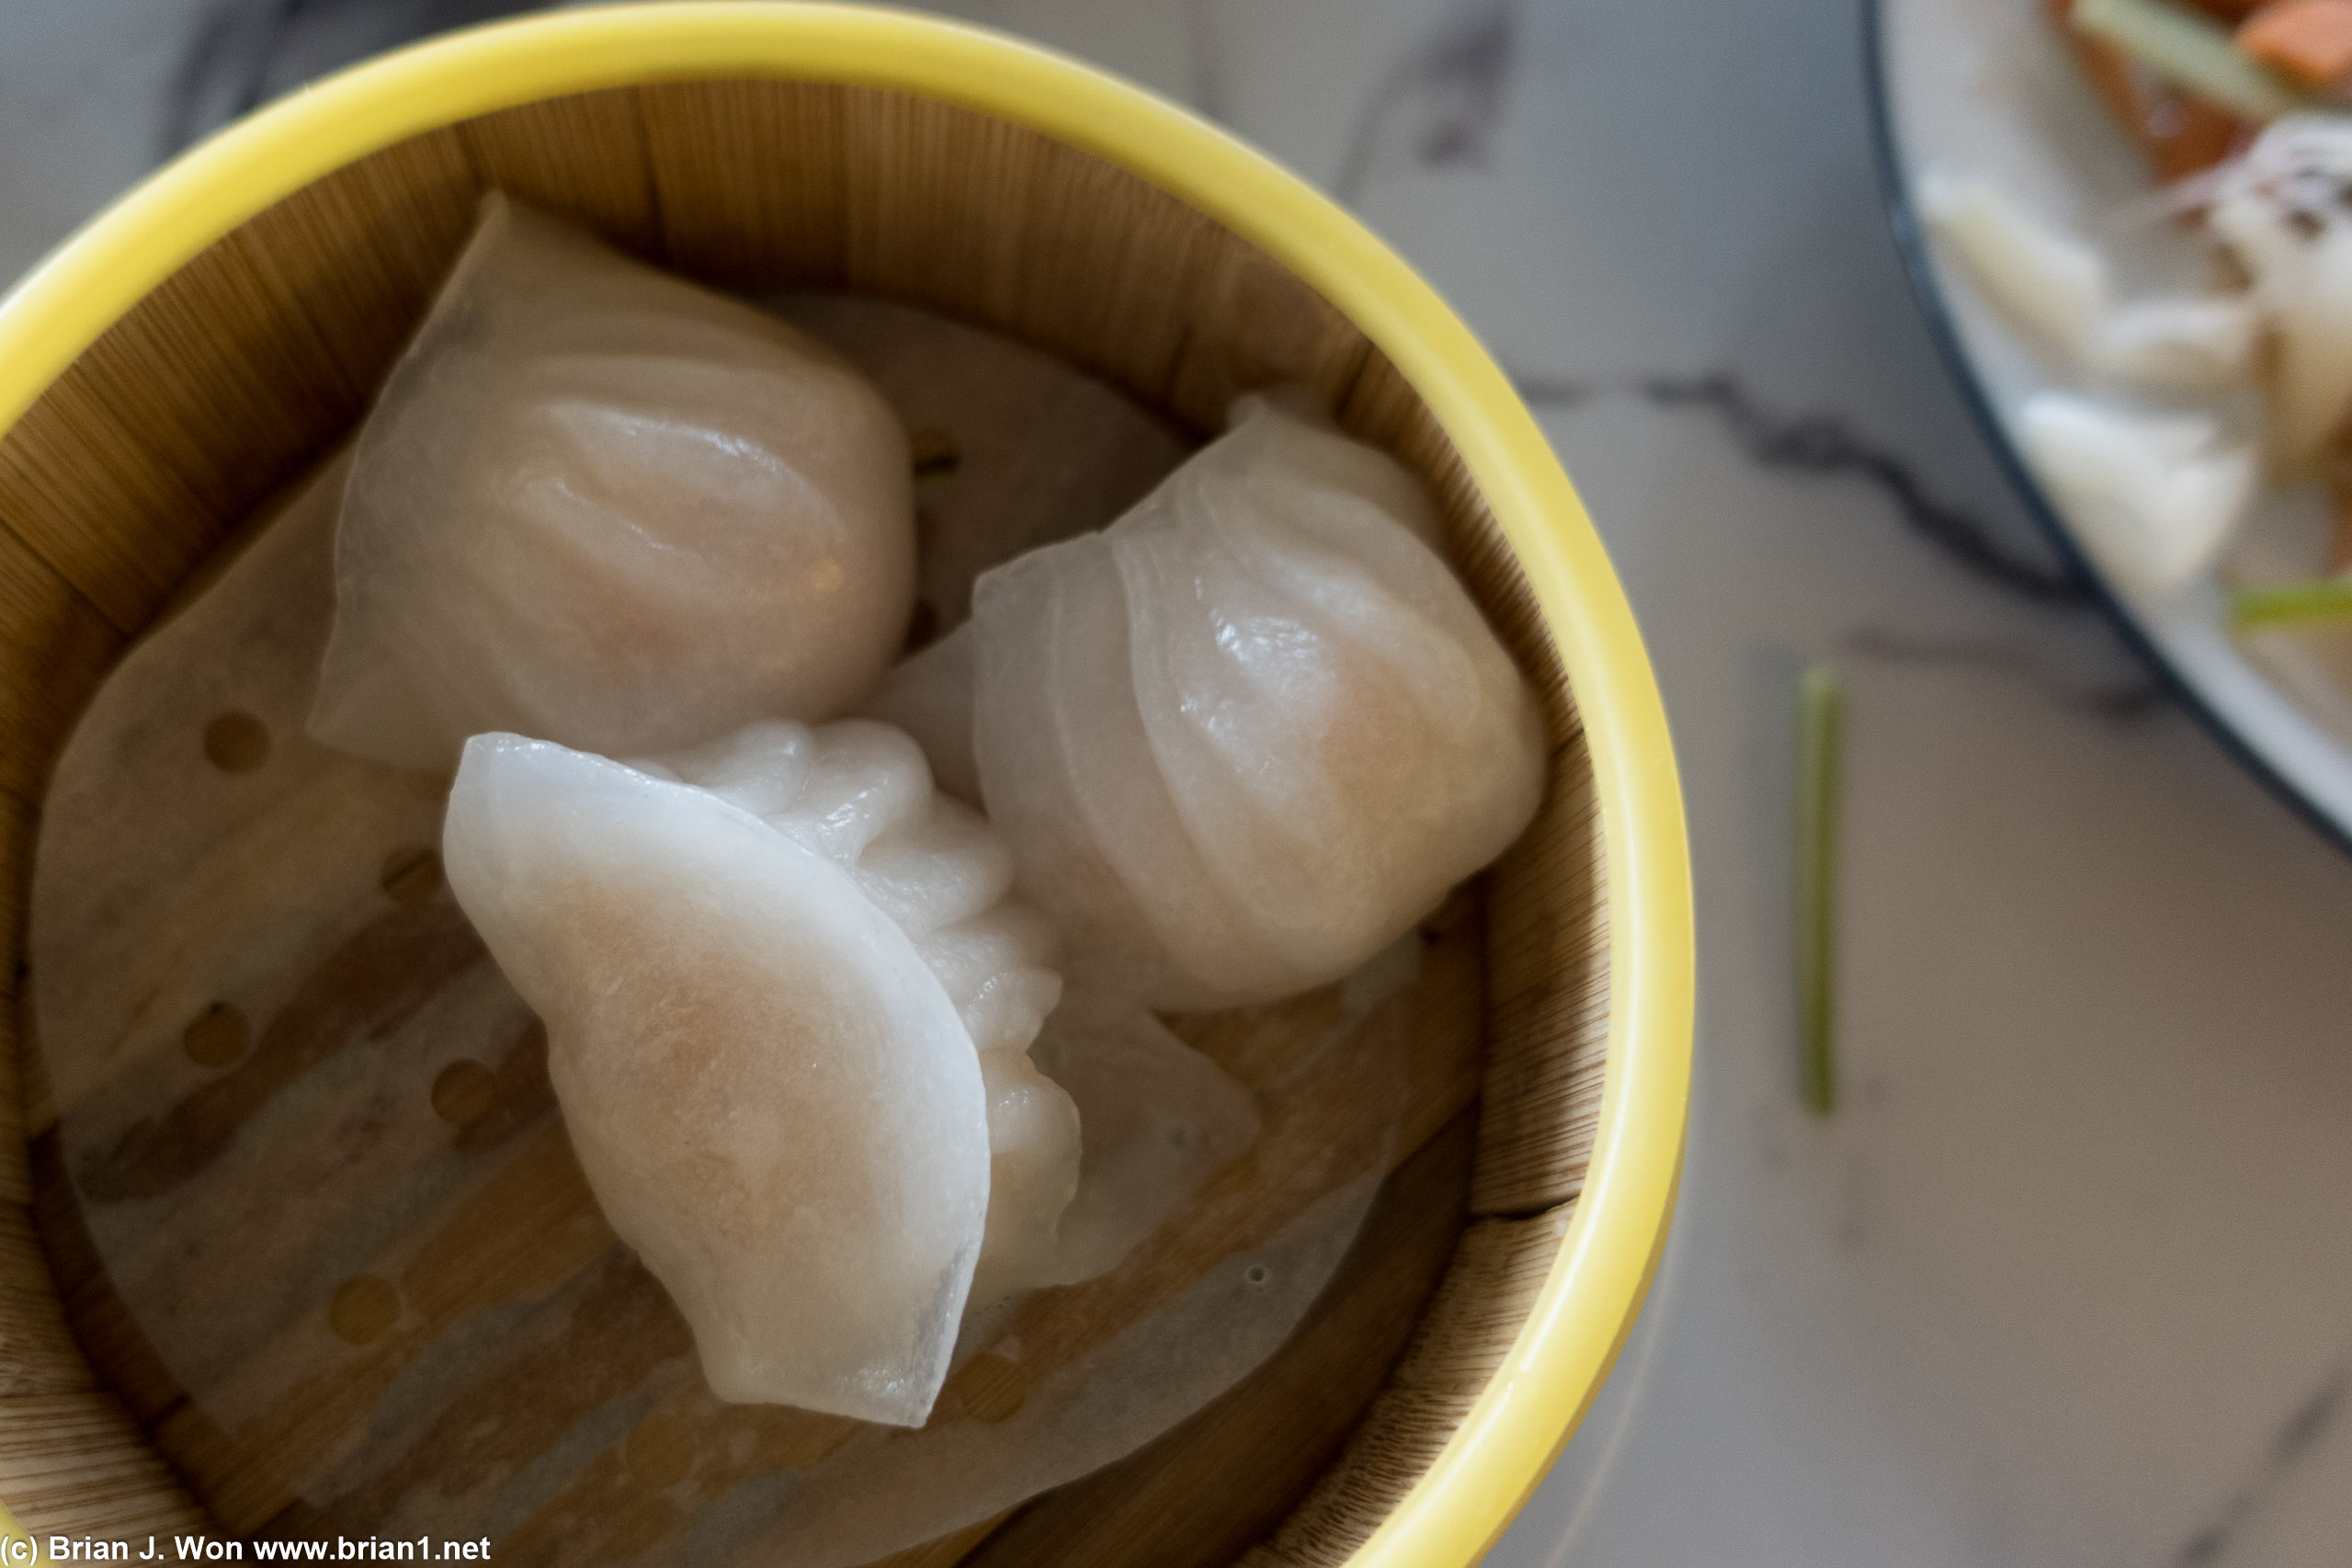 Har gow were forgettable. Not bad, not great.